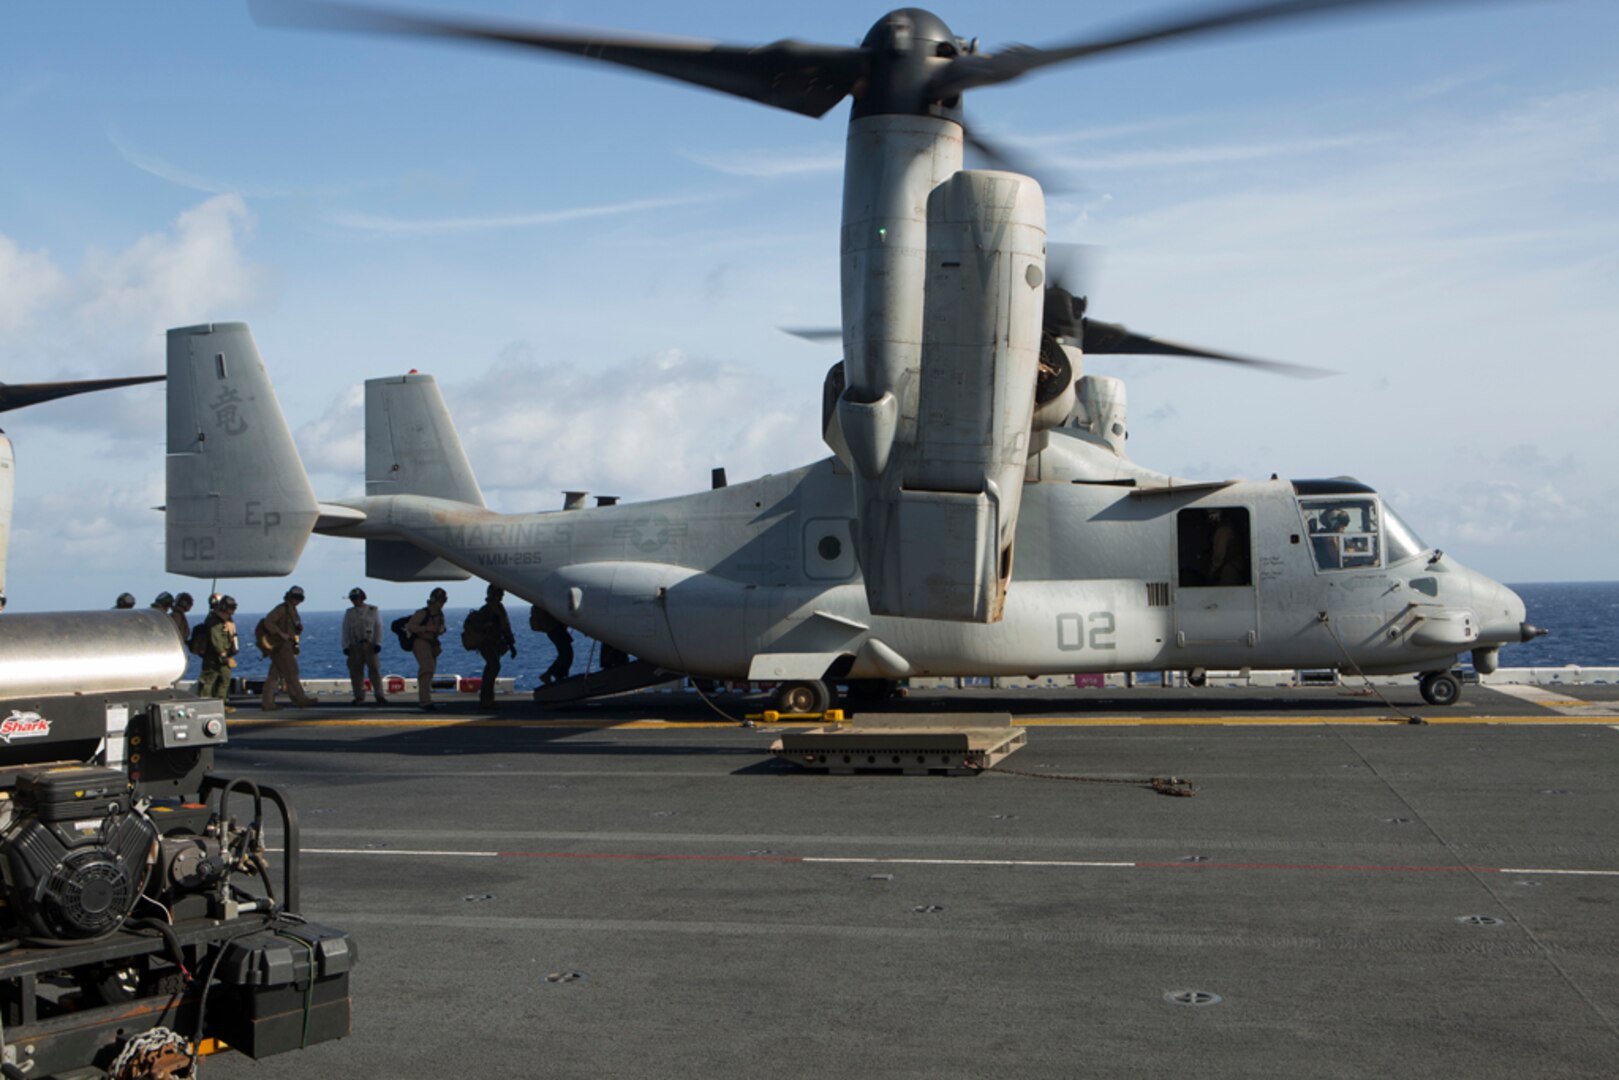 BONHOMME At Sea (Aug. 8, 2015) - U.S. Marines and sailors with the 31st Marine Expeditionary Unit load into an MV-22B Osprey aboard the USS Bonhomme Richard (LHD 6). The 31st MEU is staging Ospreys in Guam in support of typhoon recovery efforts in Saipan. The aircraft will be on standby in the event their aerial lift capacity is needed to distribute emergency supplies to remote areas. Saipan, the most populated island in the Commonwealth of the Northern Mariana Islands, was struck by Typhoon Soudelor Aug. 2-3. 